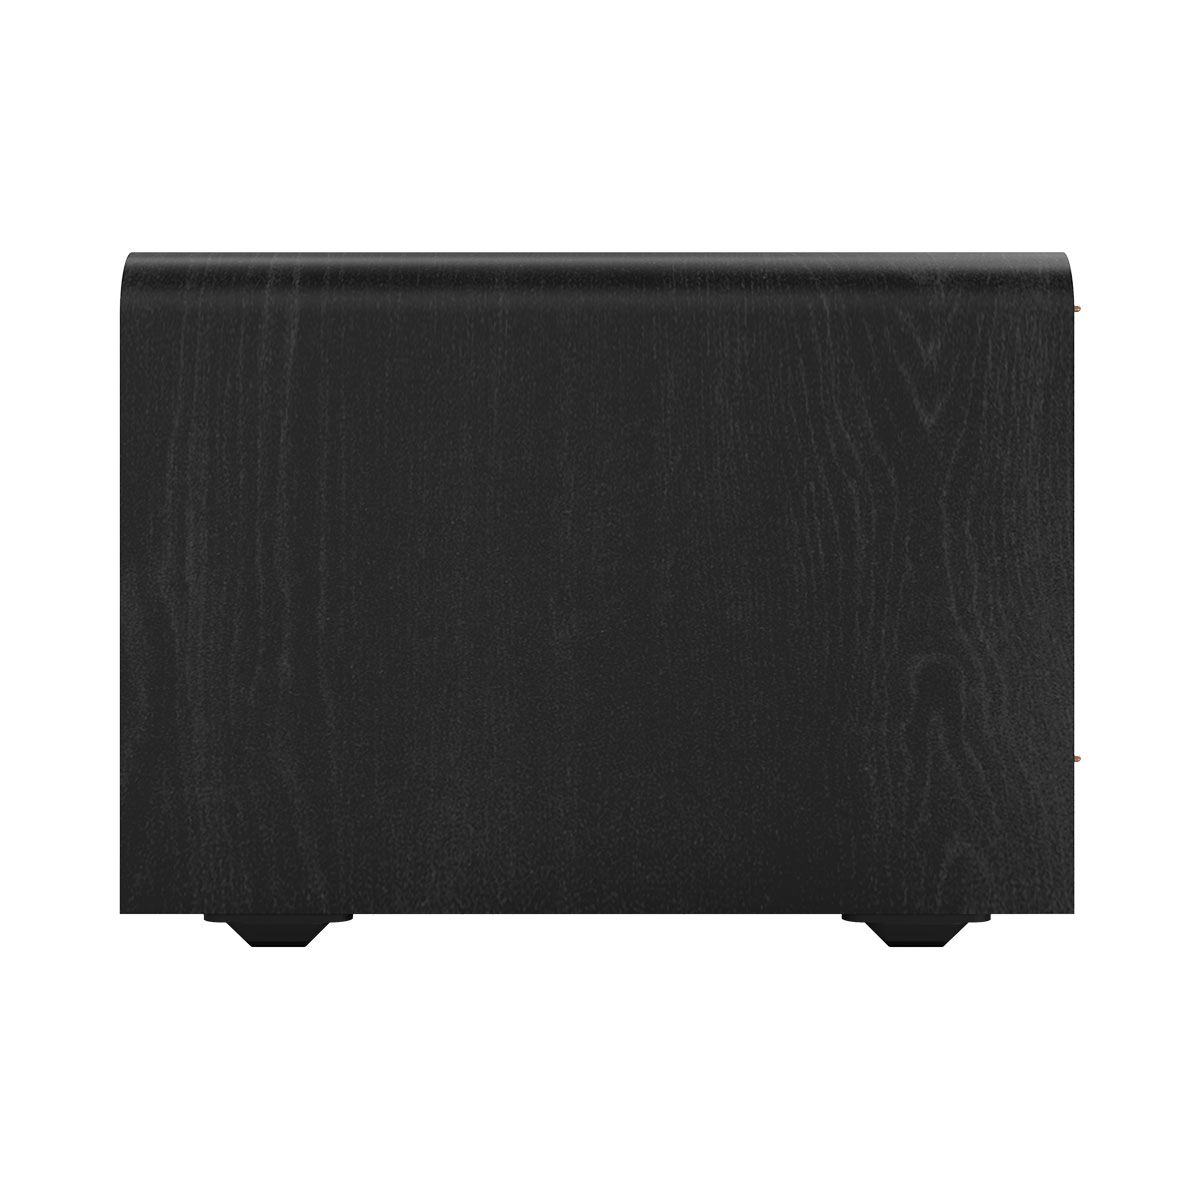 Klipsch RP-1000SW 10" Powered Subwoofer - Ebony - side view without grille